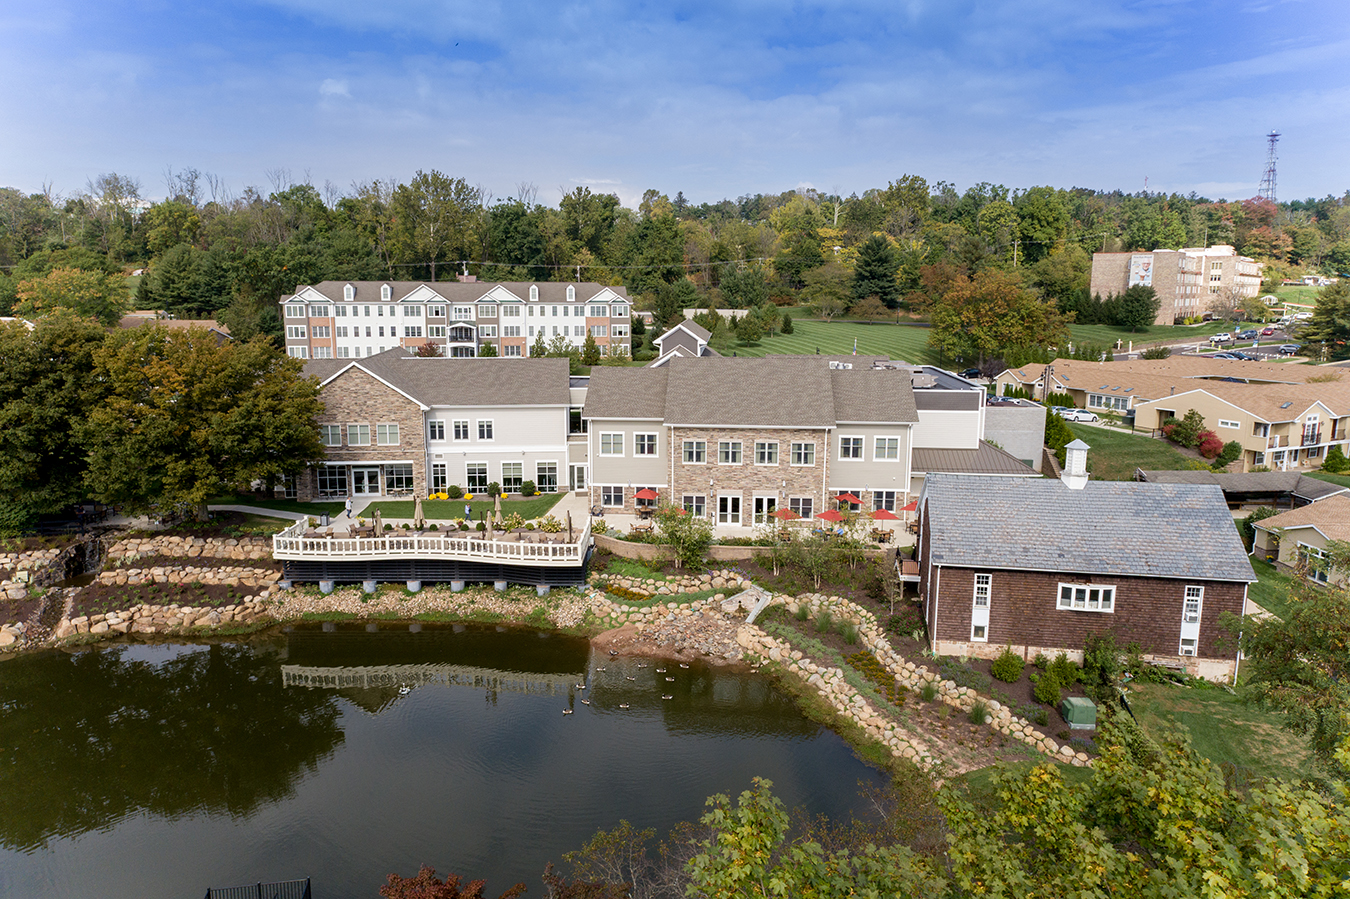 PSL and Doylestown Hospital enter into Letter of Intent for Purchase of Pine Run Retirement Community